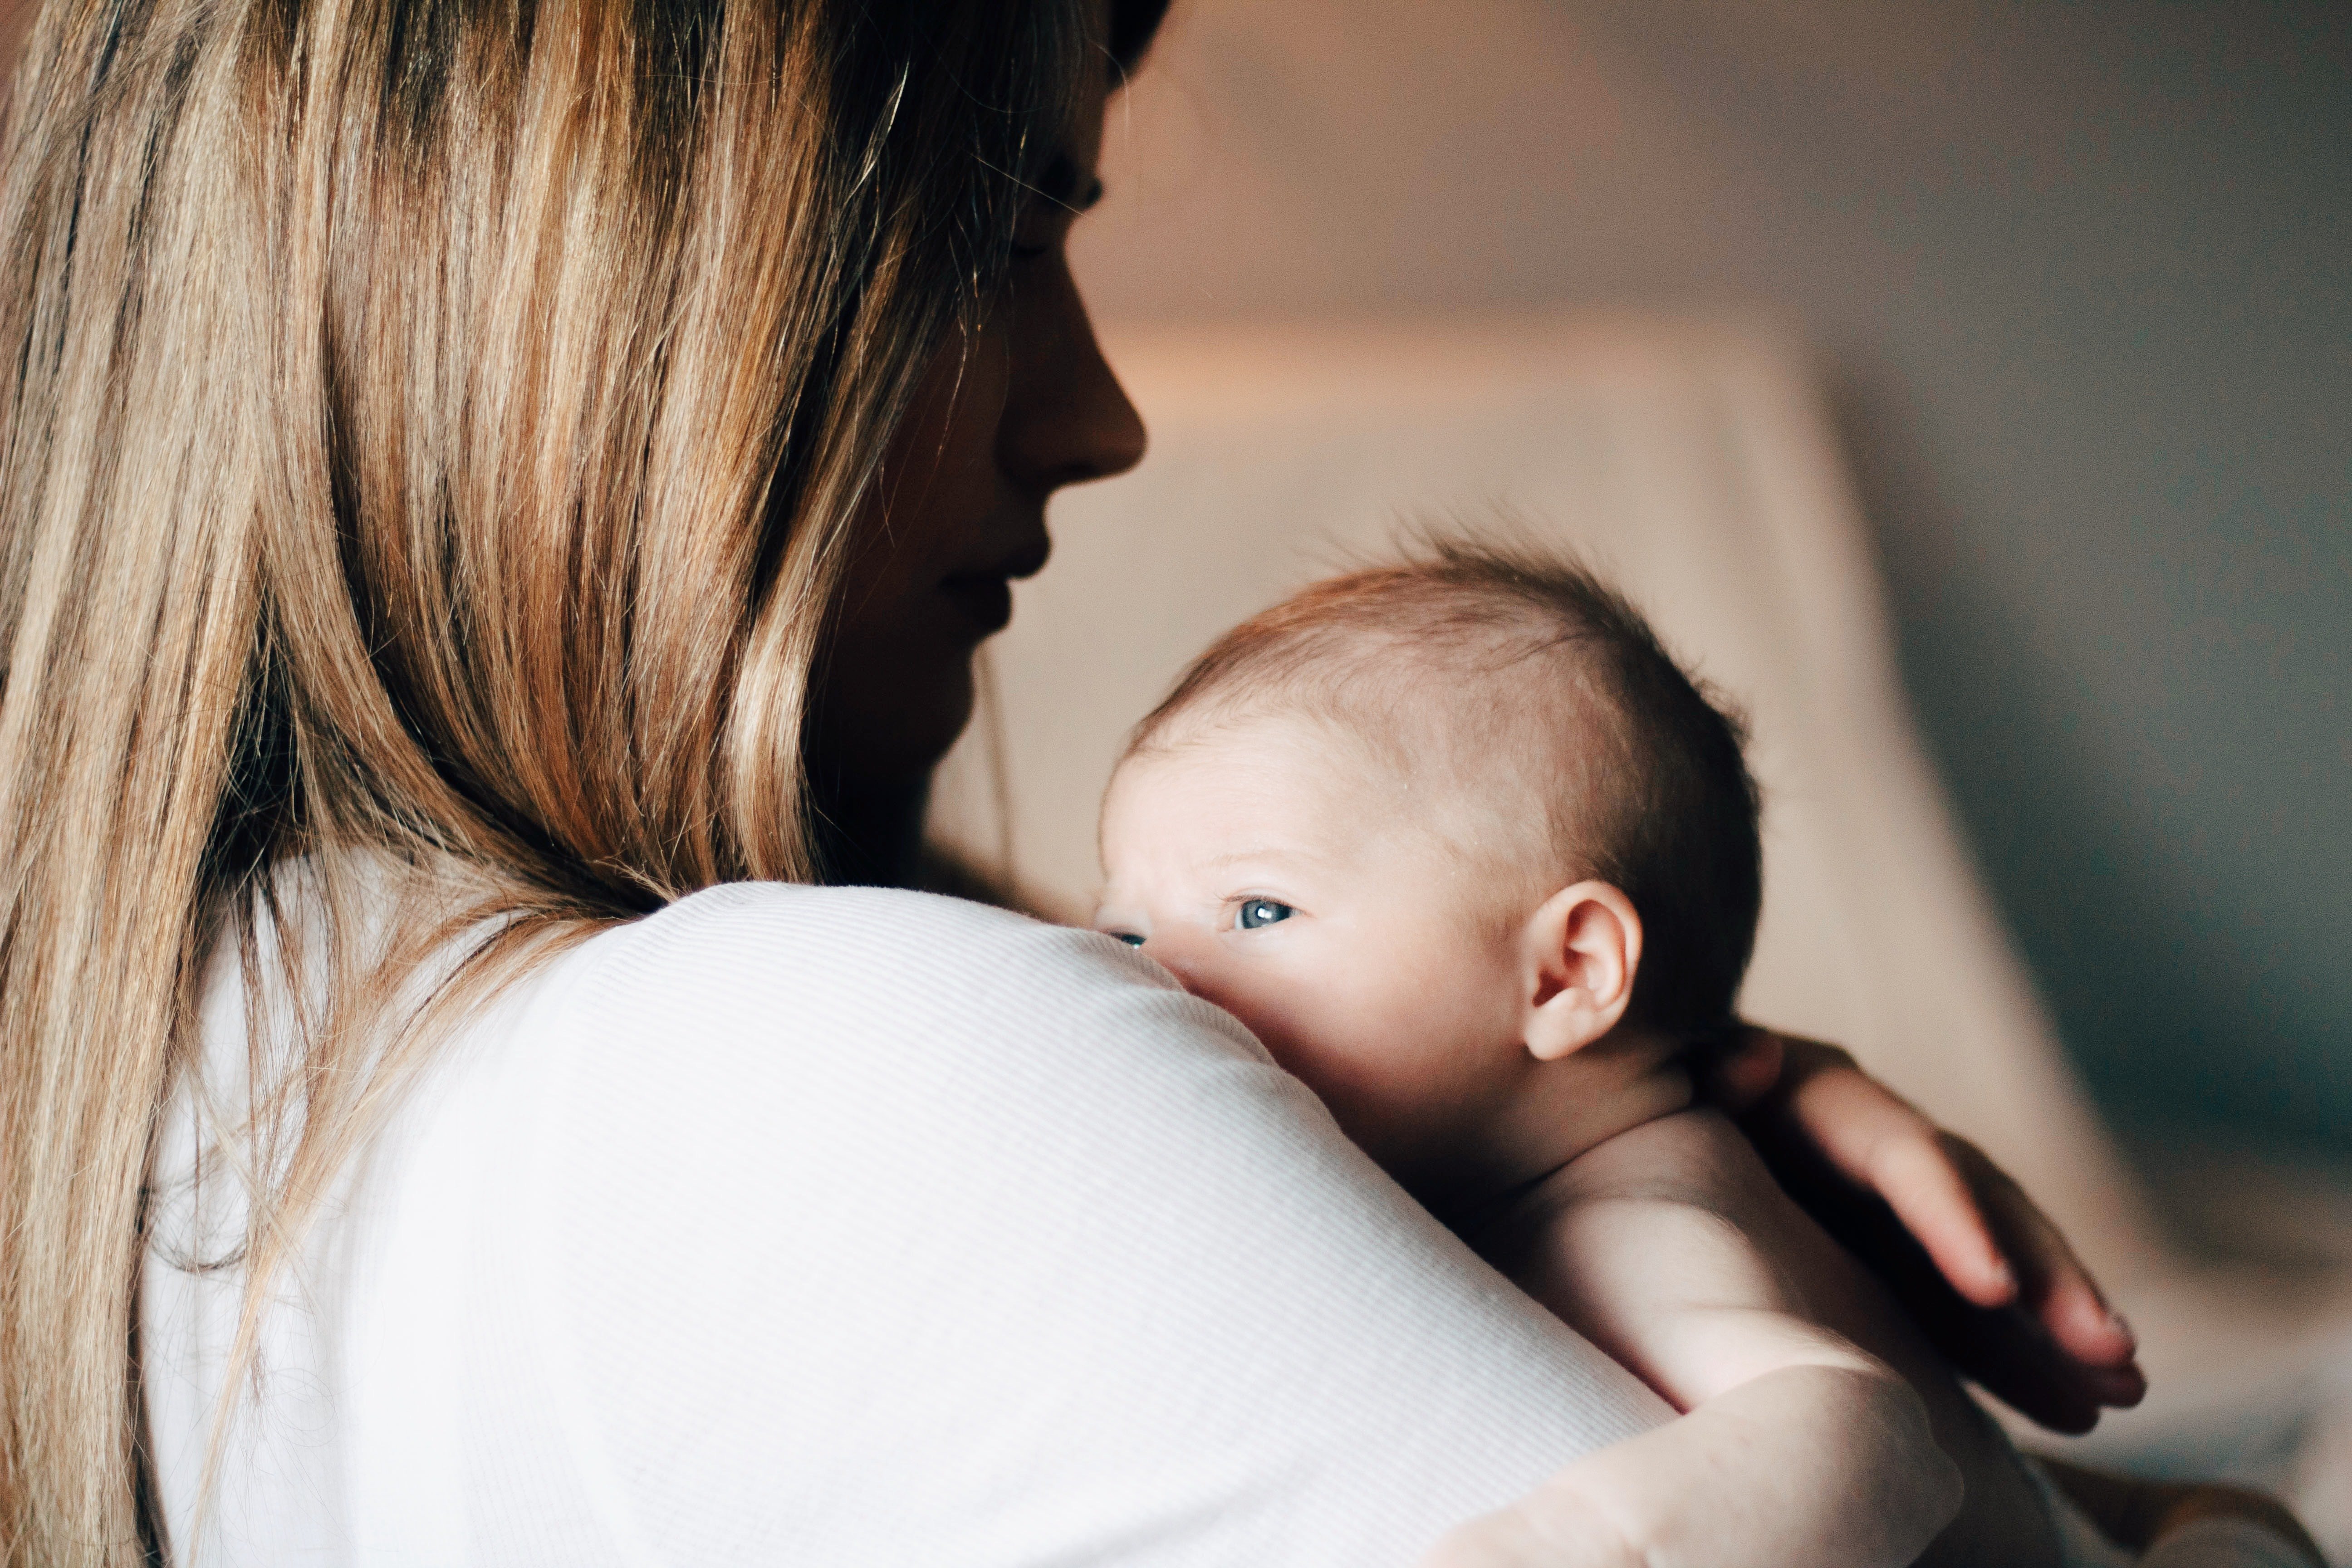 Problems sparked after OP's sister-in-law welcomed her baby. | Source: Unsplash